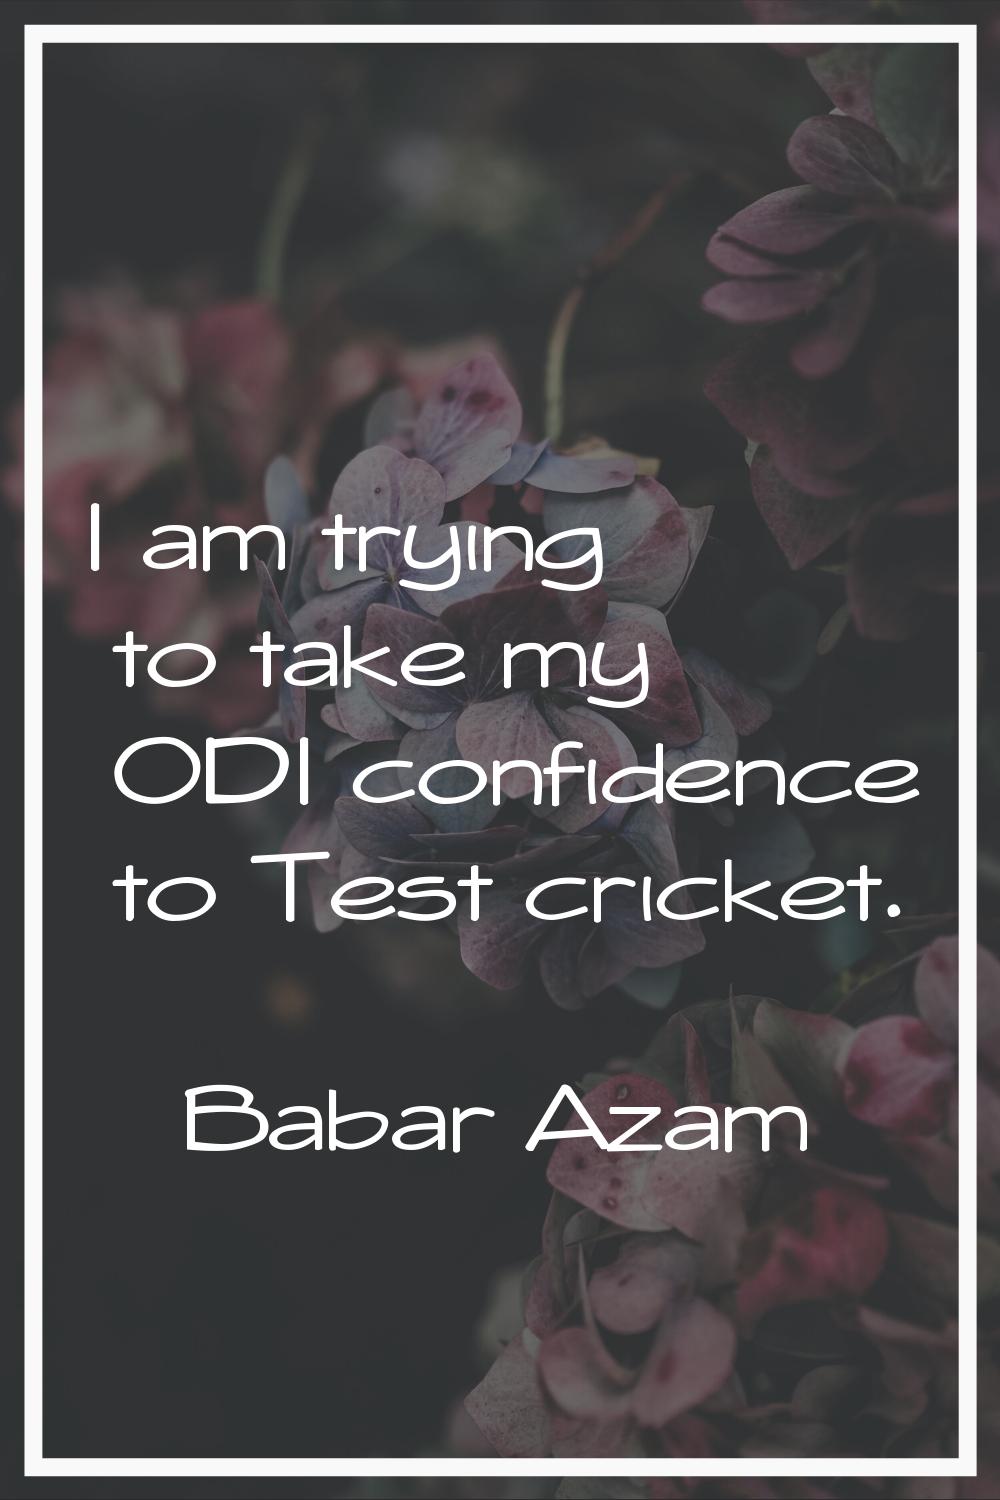 I am trying to take my ODI confidence to Test cricket.